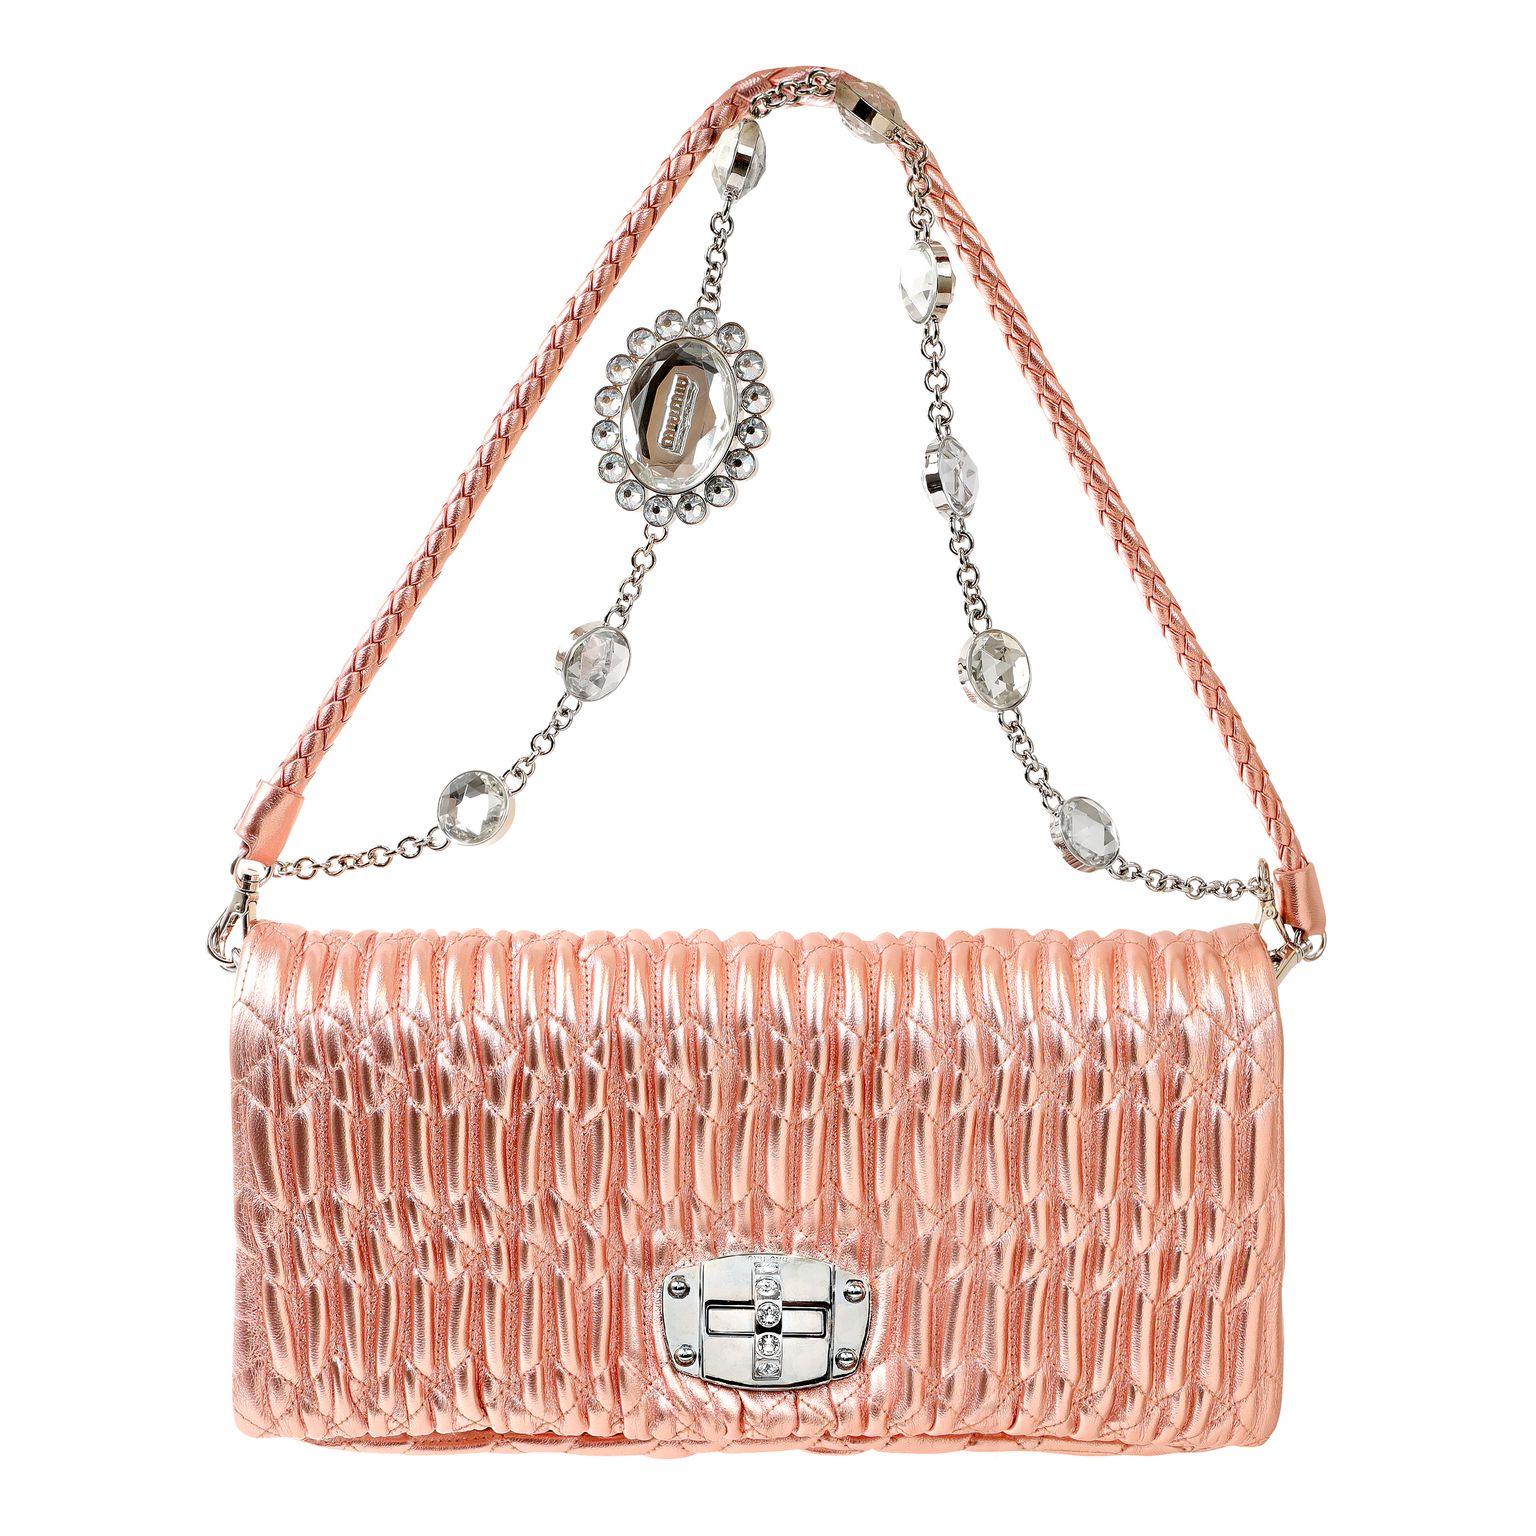 Miu Miu Metallic Pink Crystal Iconic Cloquè Small Bag with Silver Hardware In Excellent Condition For Sale In Palm Beach, FL